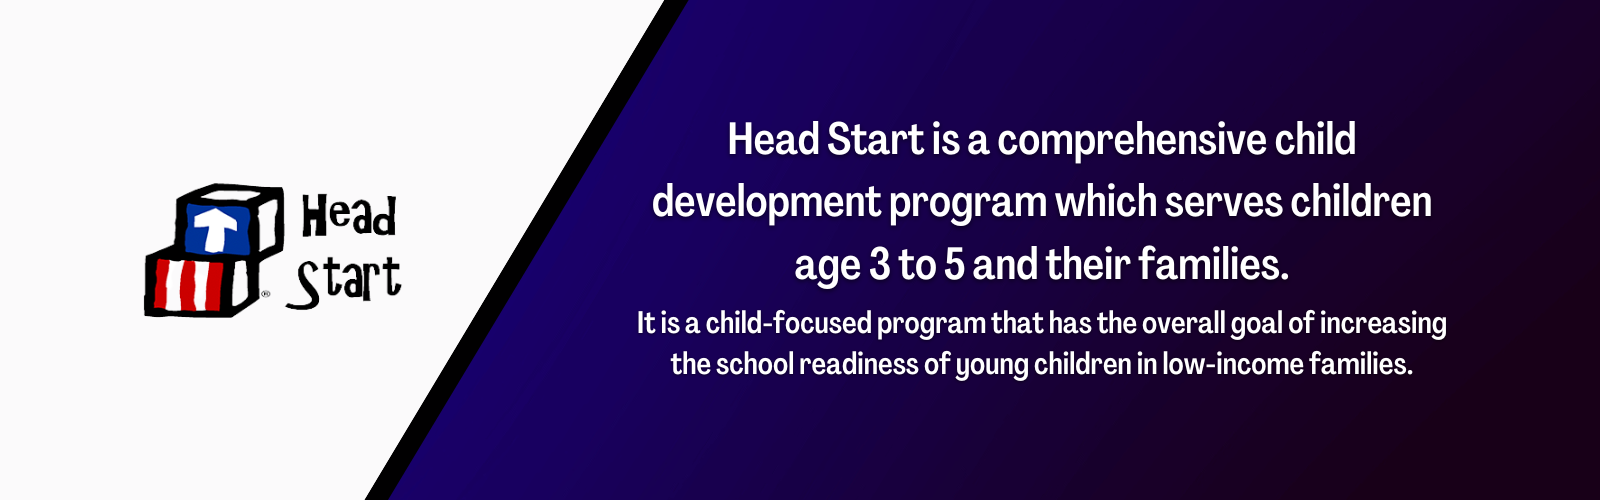 Head Start logo with blue and text